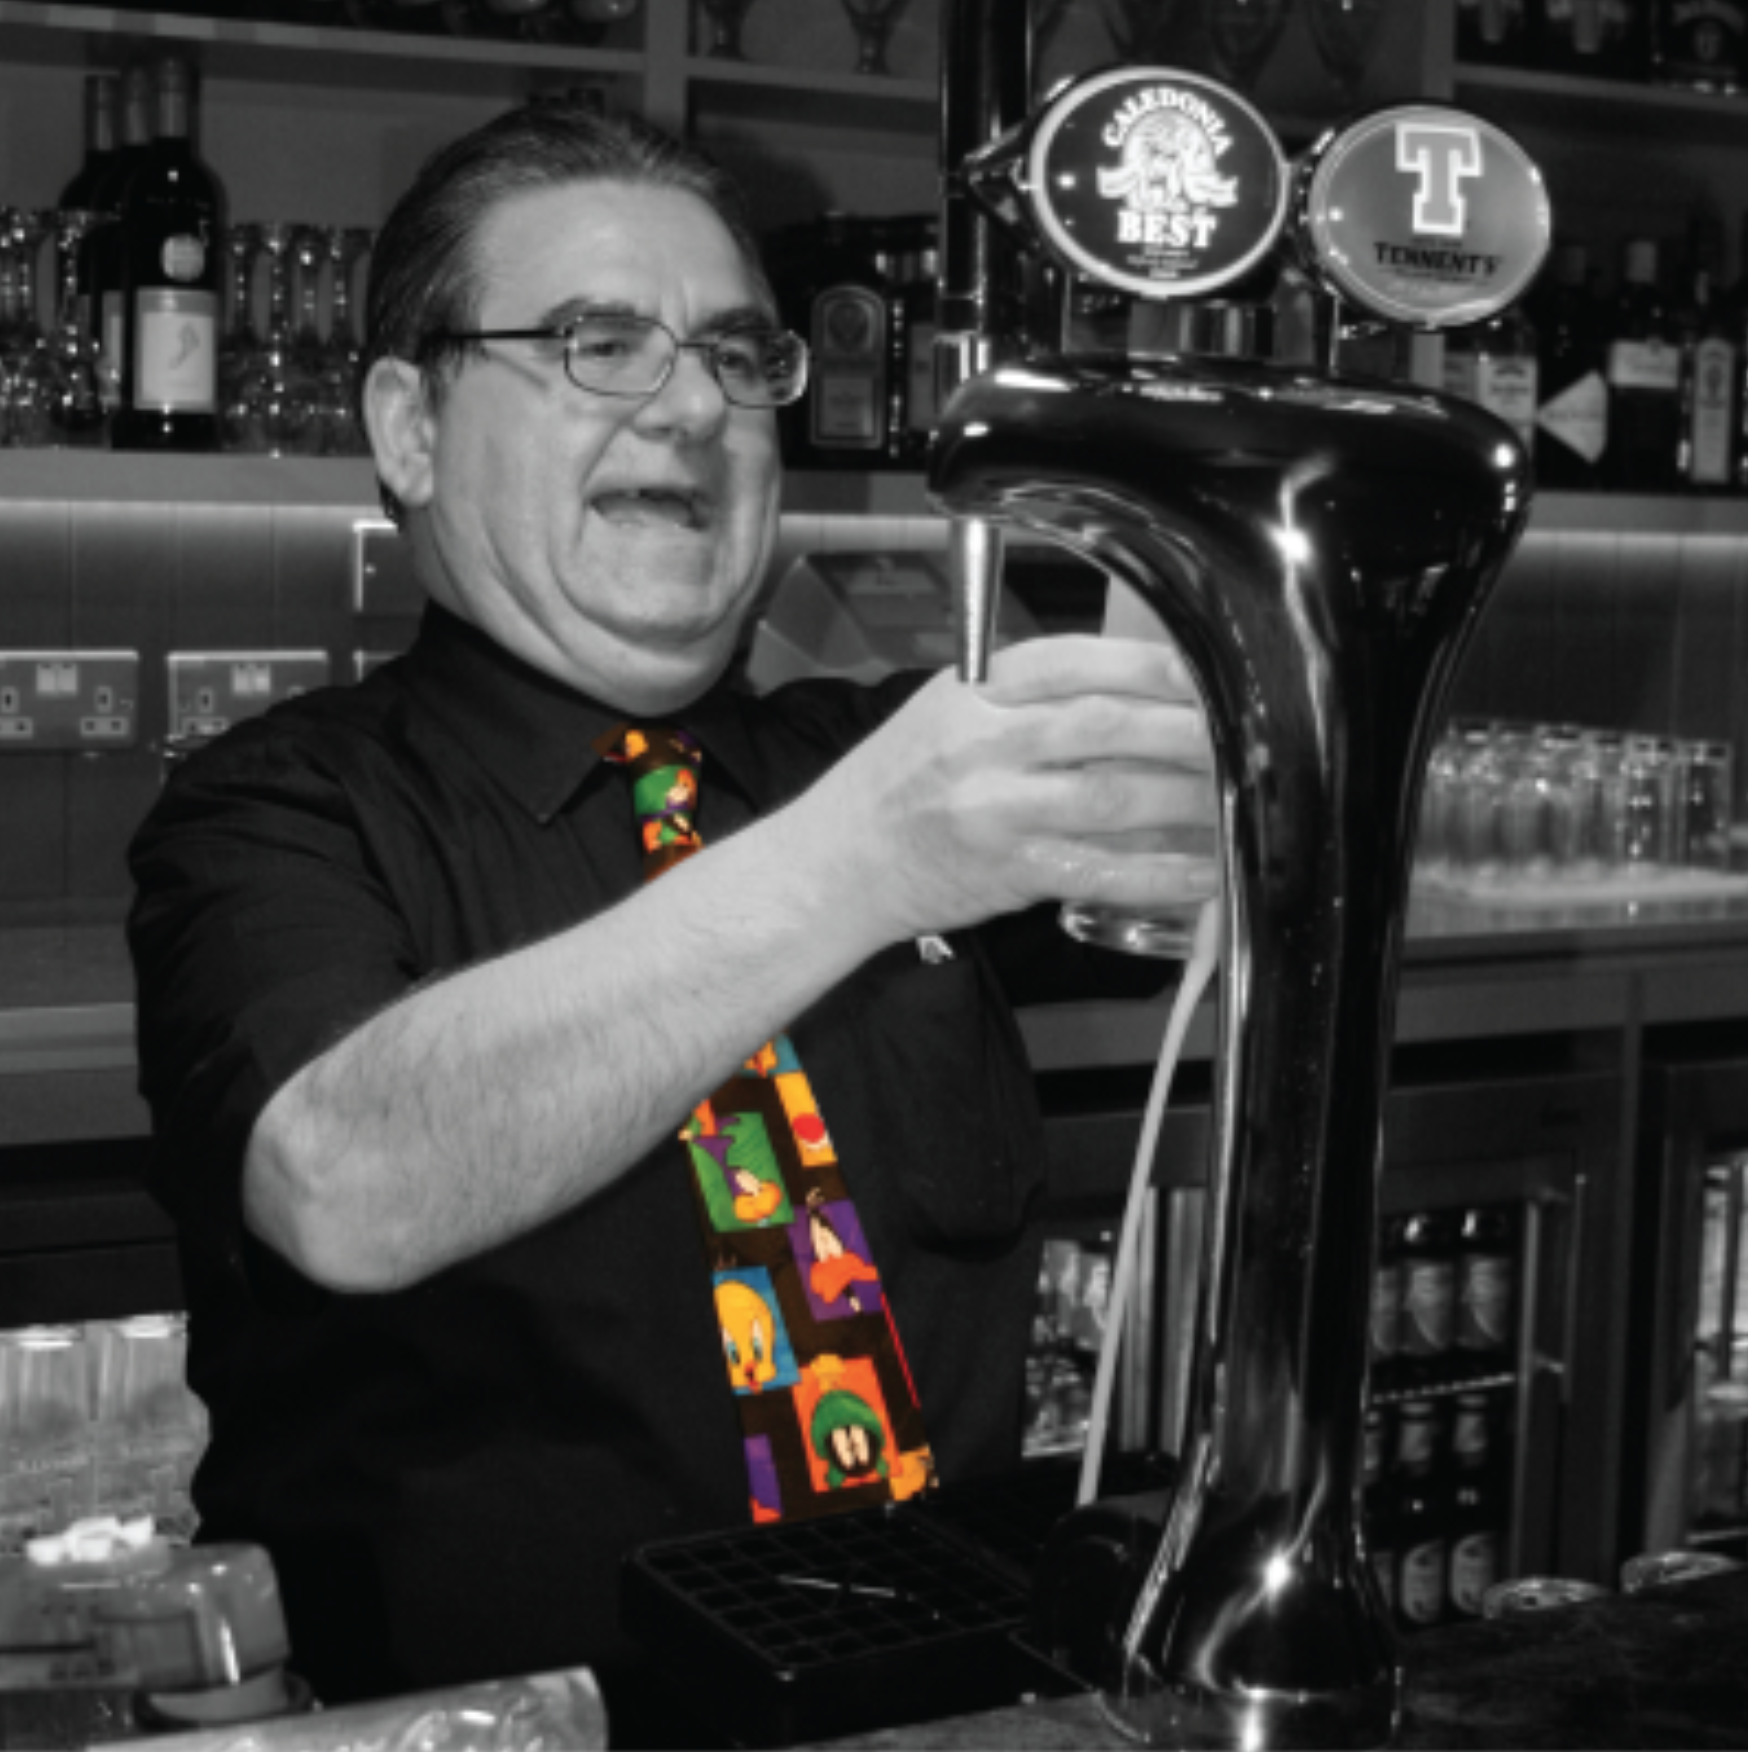 Sandy pulls a pint at the bar, he is smiling and wearing a tie with images of Looney Tunes characters.